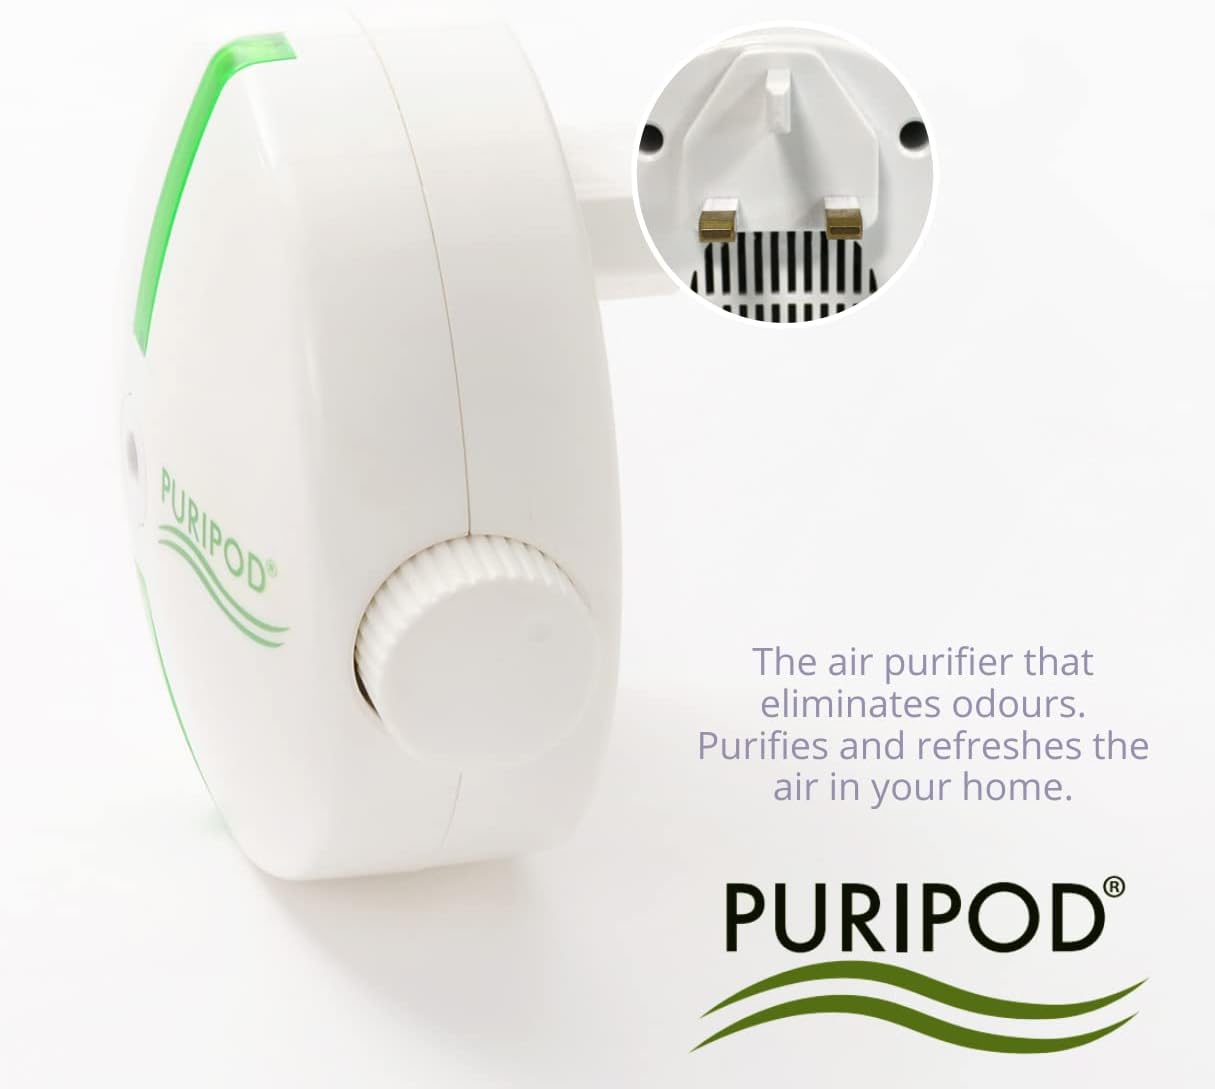 PURIPOD Air Purifier for home hepa filter, Mini Air Cleaner, Clean & Fresh Air, Against Pollen, Dust, Allergens, Smoke, Purifiers for Smokers, Pet Dander, Cooking Smell - Amazing Gadgets Outlet